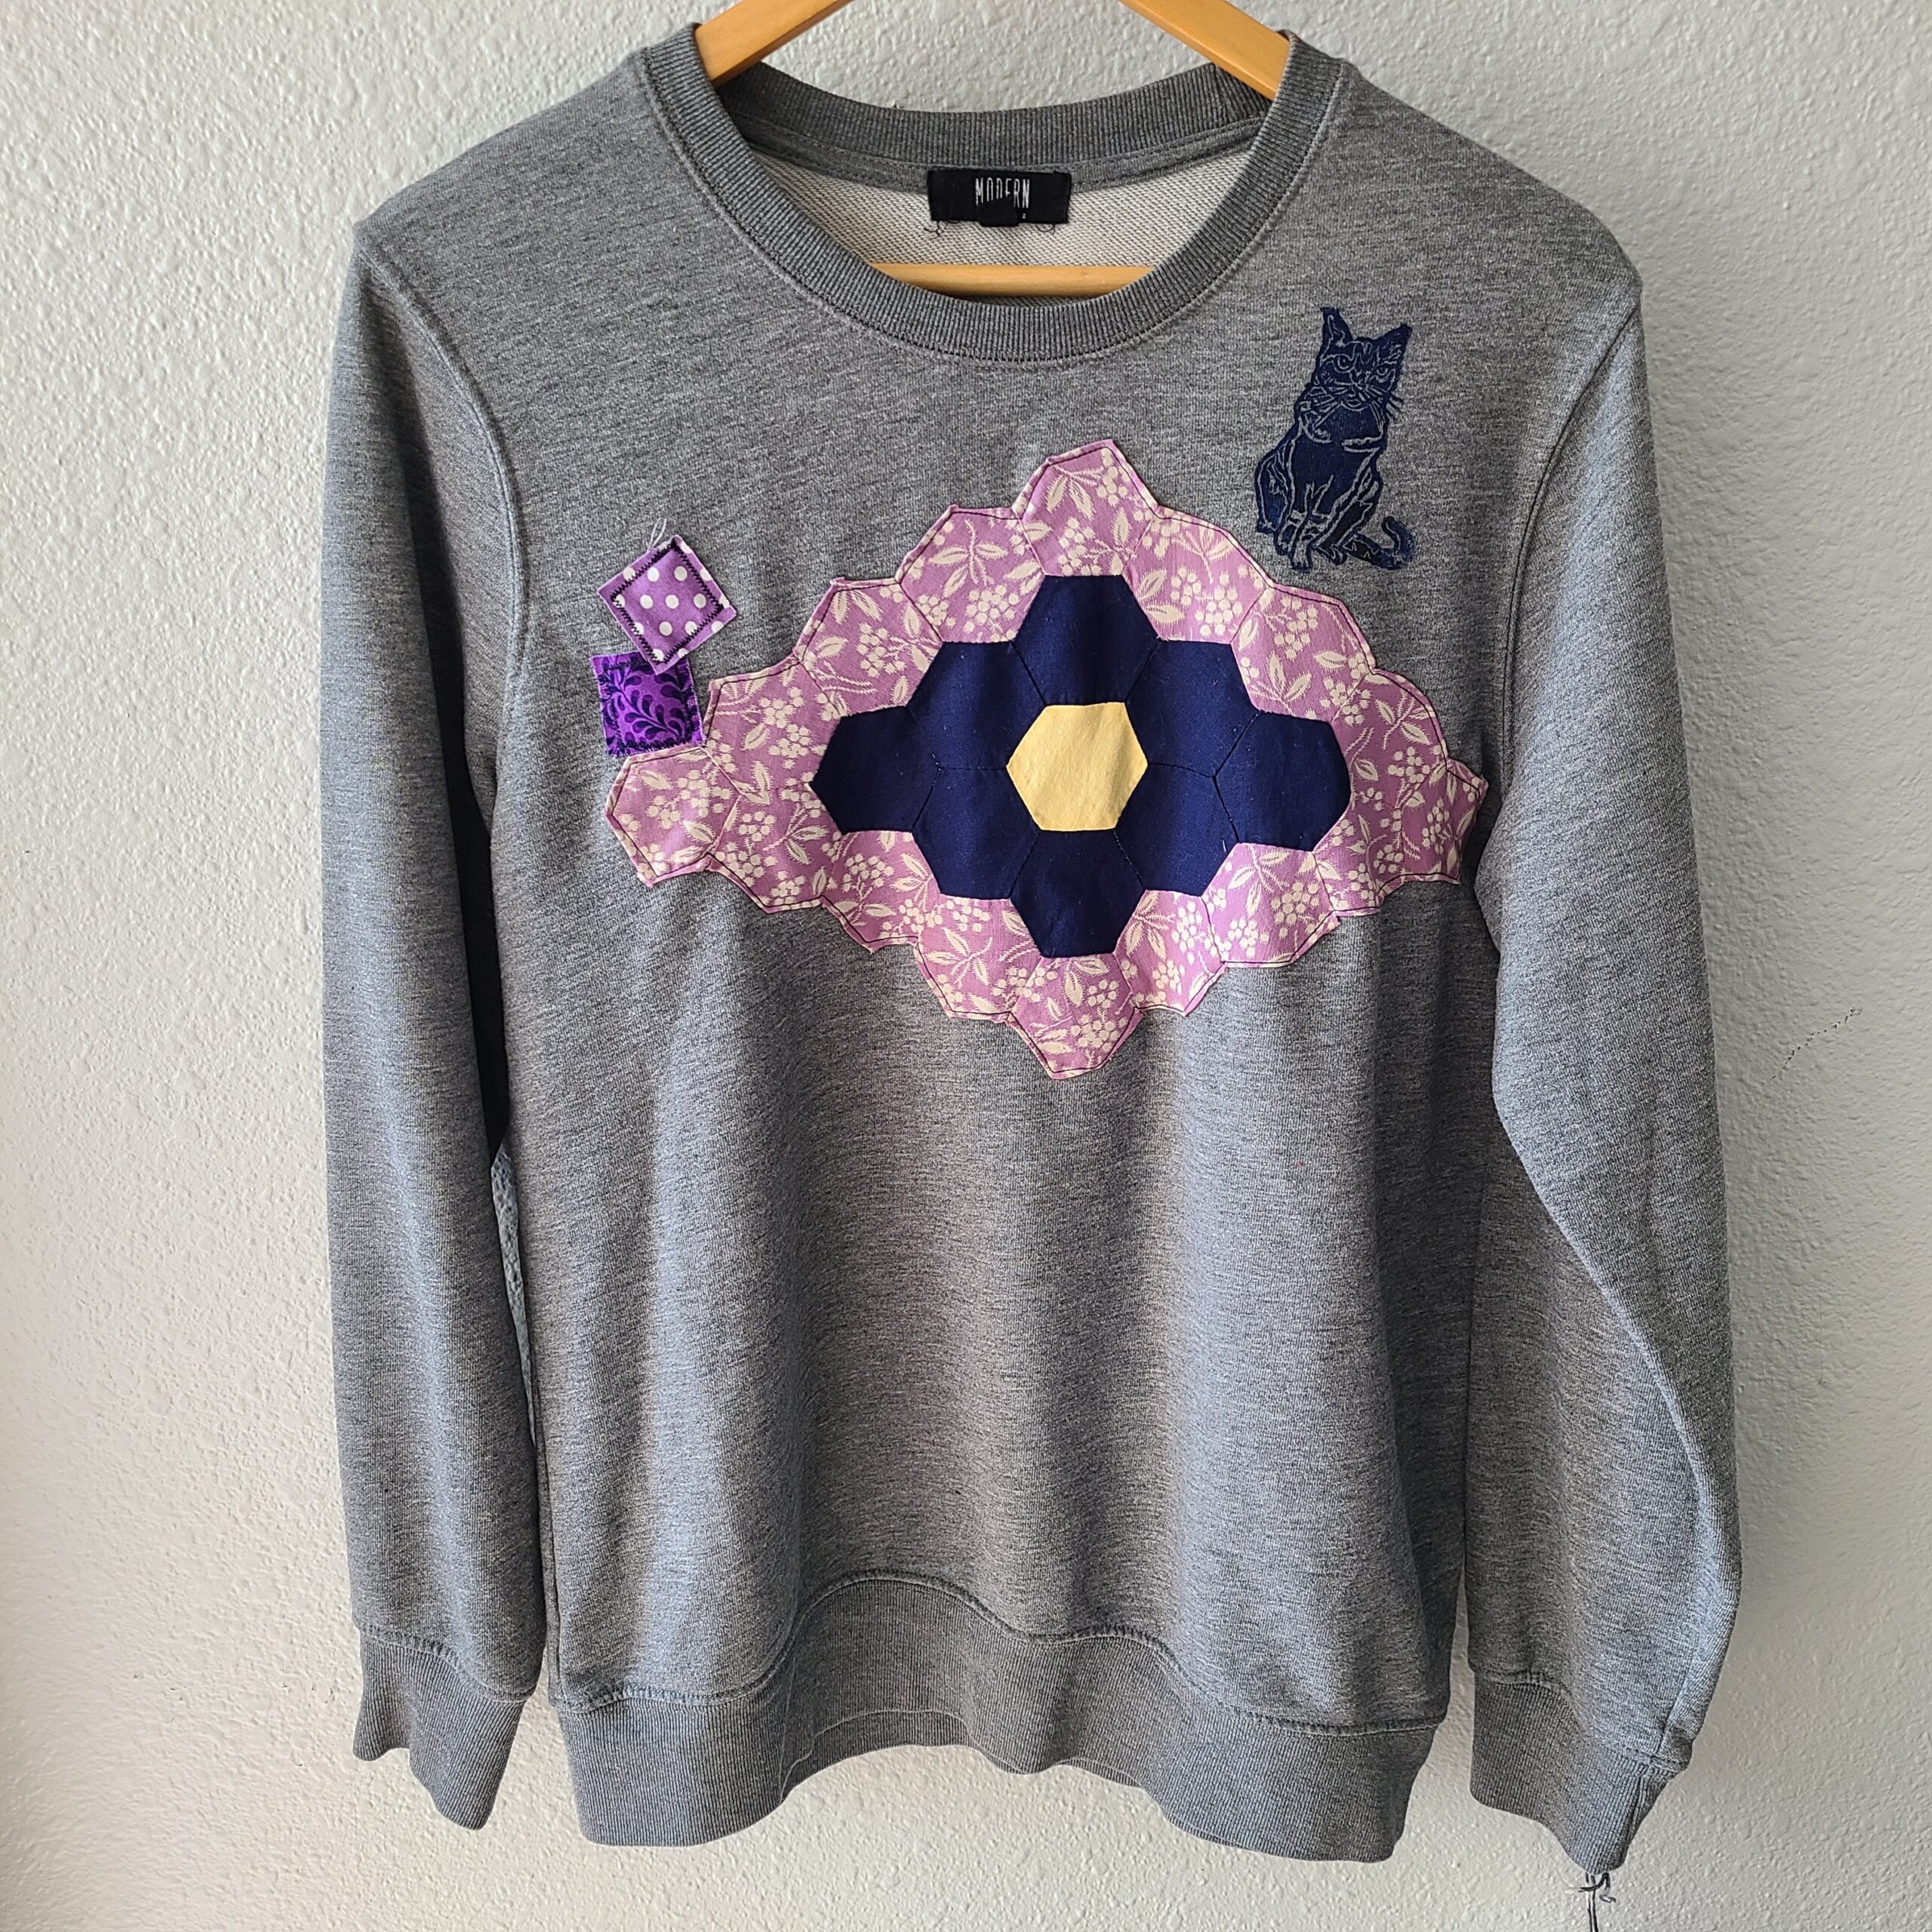 a gray sweater with a pink and blue design on it.